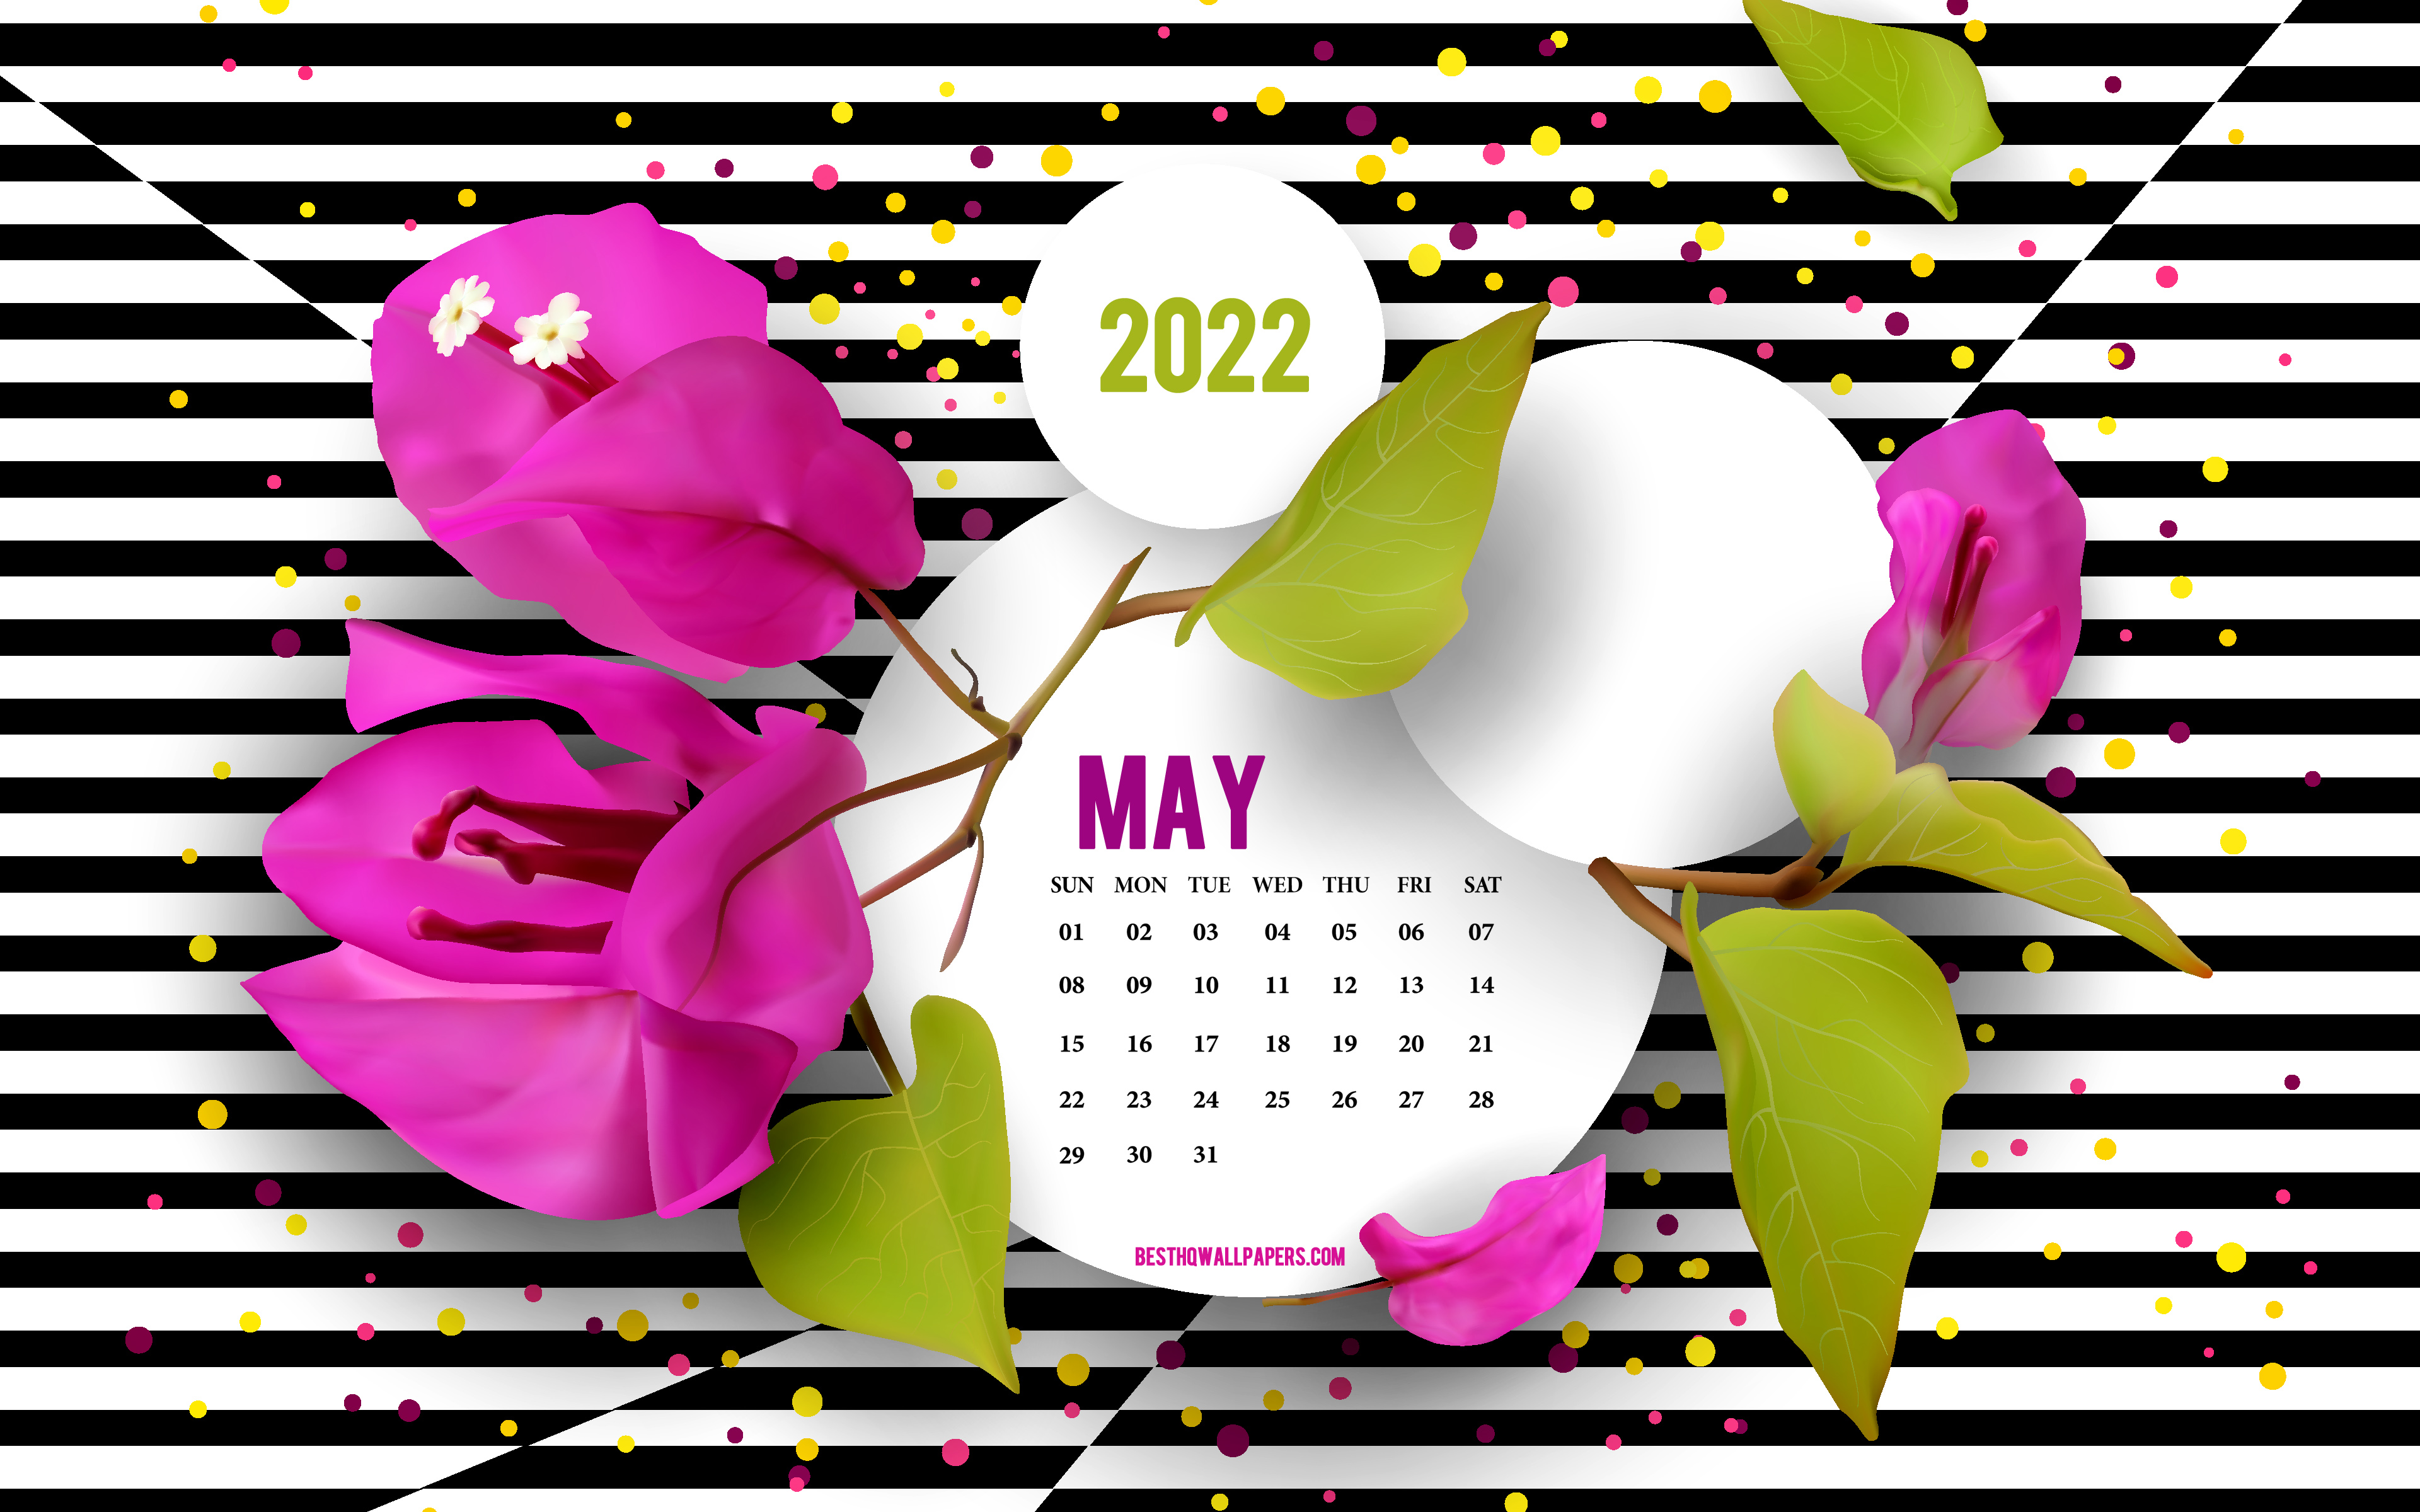 Download wallpapers 2022 May Calendar, 4k, backgrounds with flowers, creative art, May, 2022 spring calendars, black and white striped background, May 2022 Calendar, purple flowers for desktop with resolution 3840x2400. High Quality